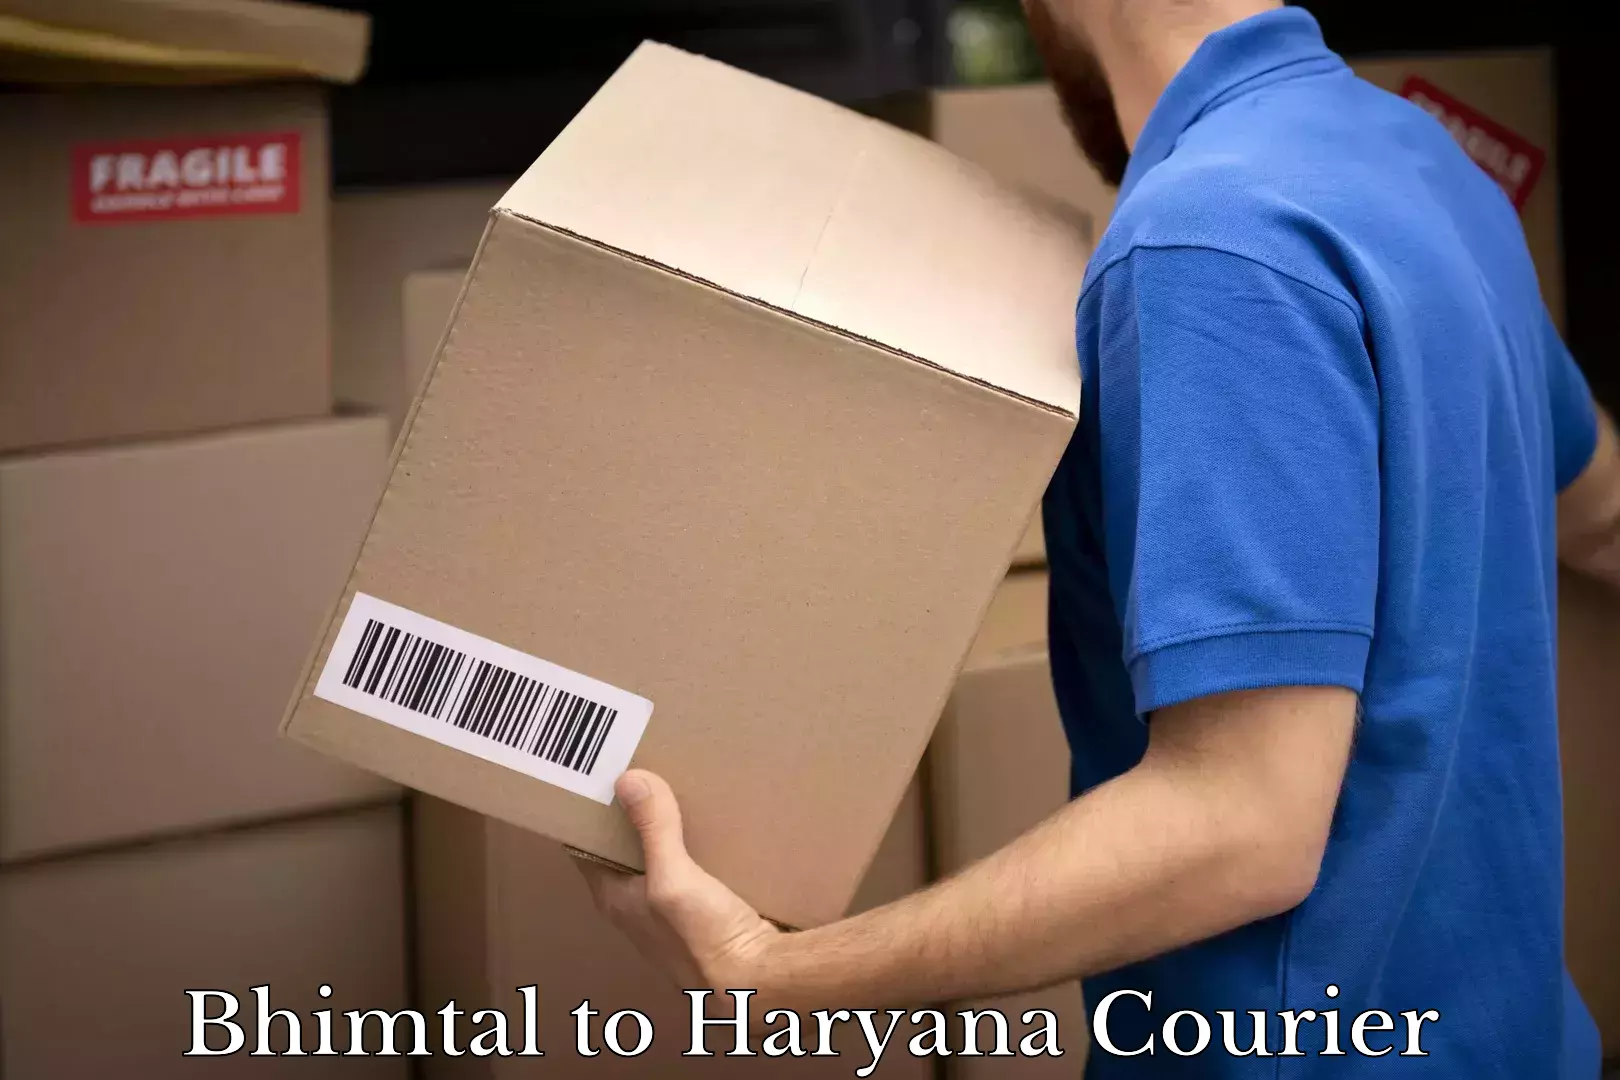 Express delivery capabilities Bhimtal to Haryana